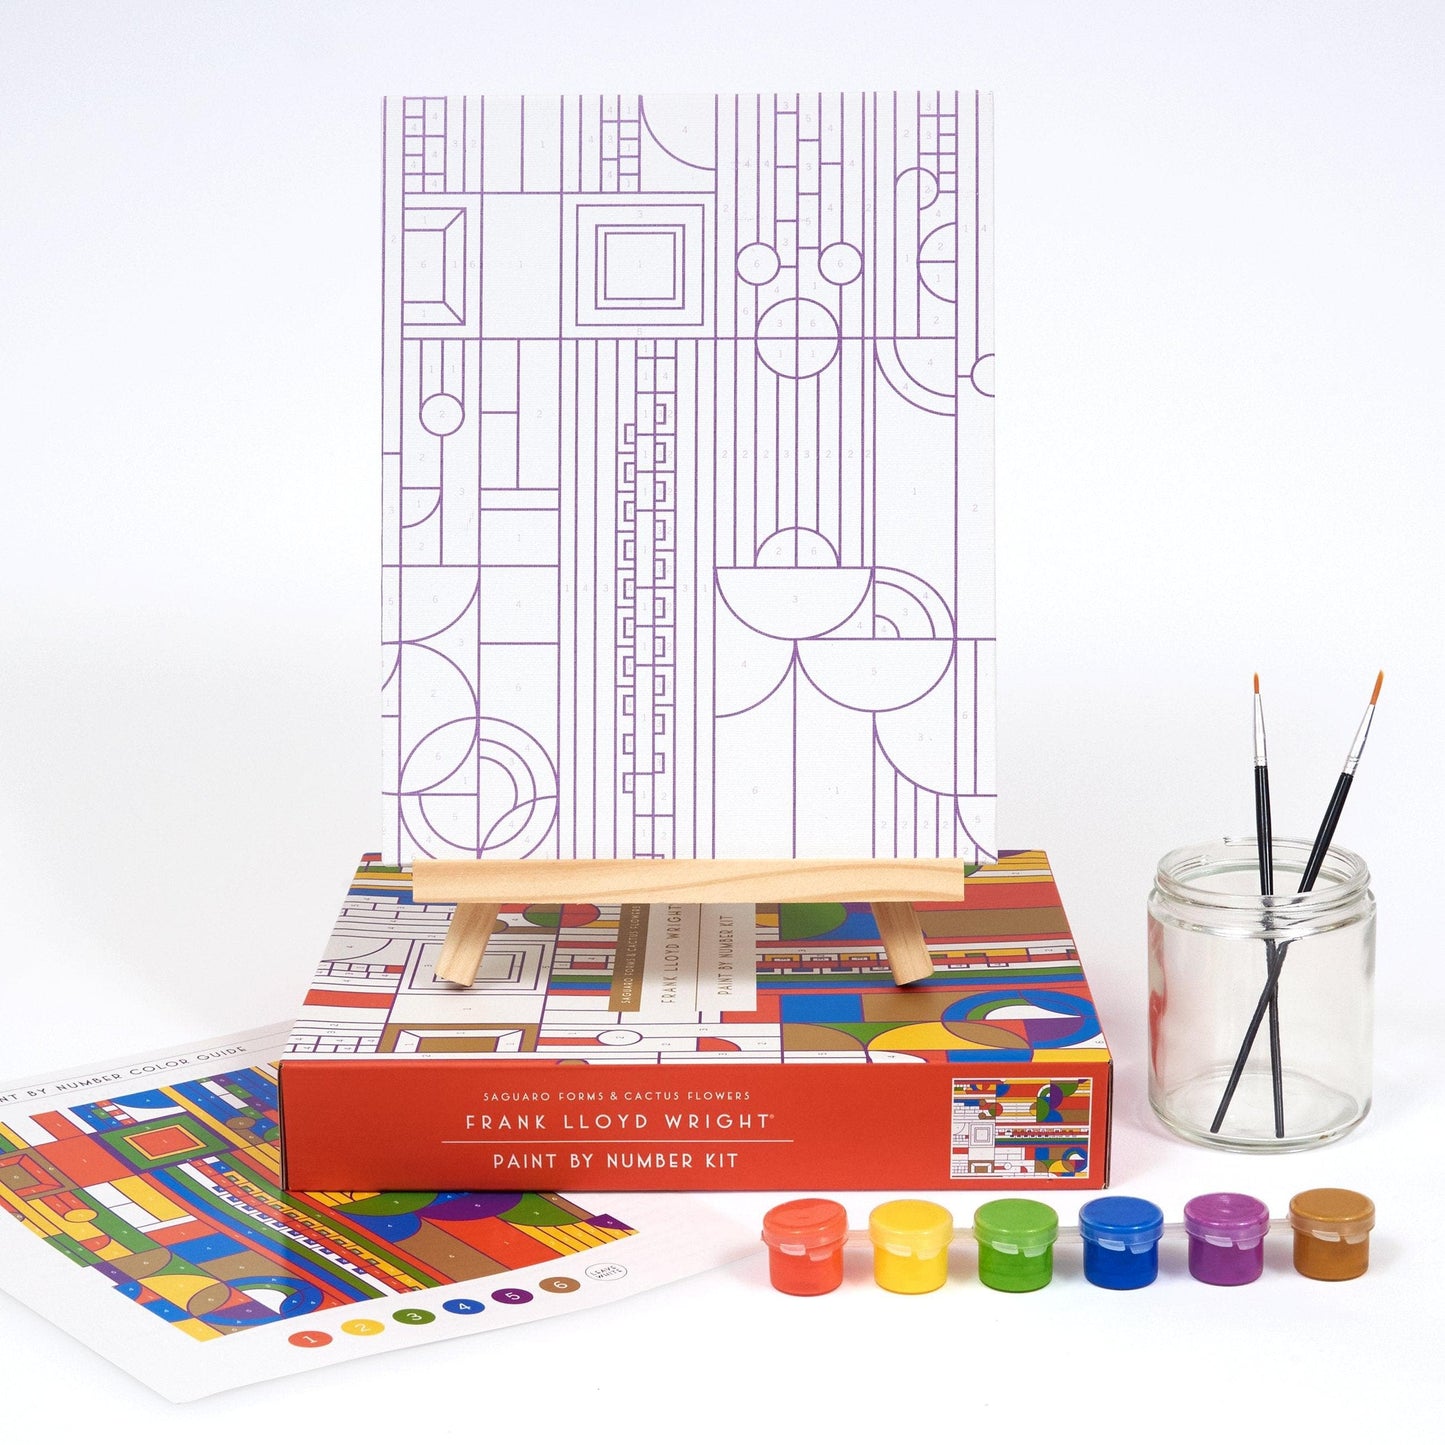 Frank Lloyd Wright Saguaro Cactus and Forms Paint By Number Kit Frank Lloyd Wright Saguaro Cactus and Forms Paint By Number Kit Frank Lloyd Wright Saguaro Cactus and Forms Paint By Number Kit 